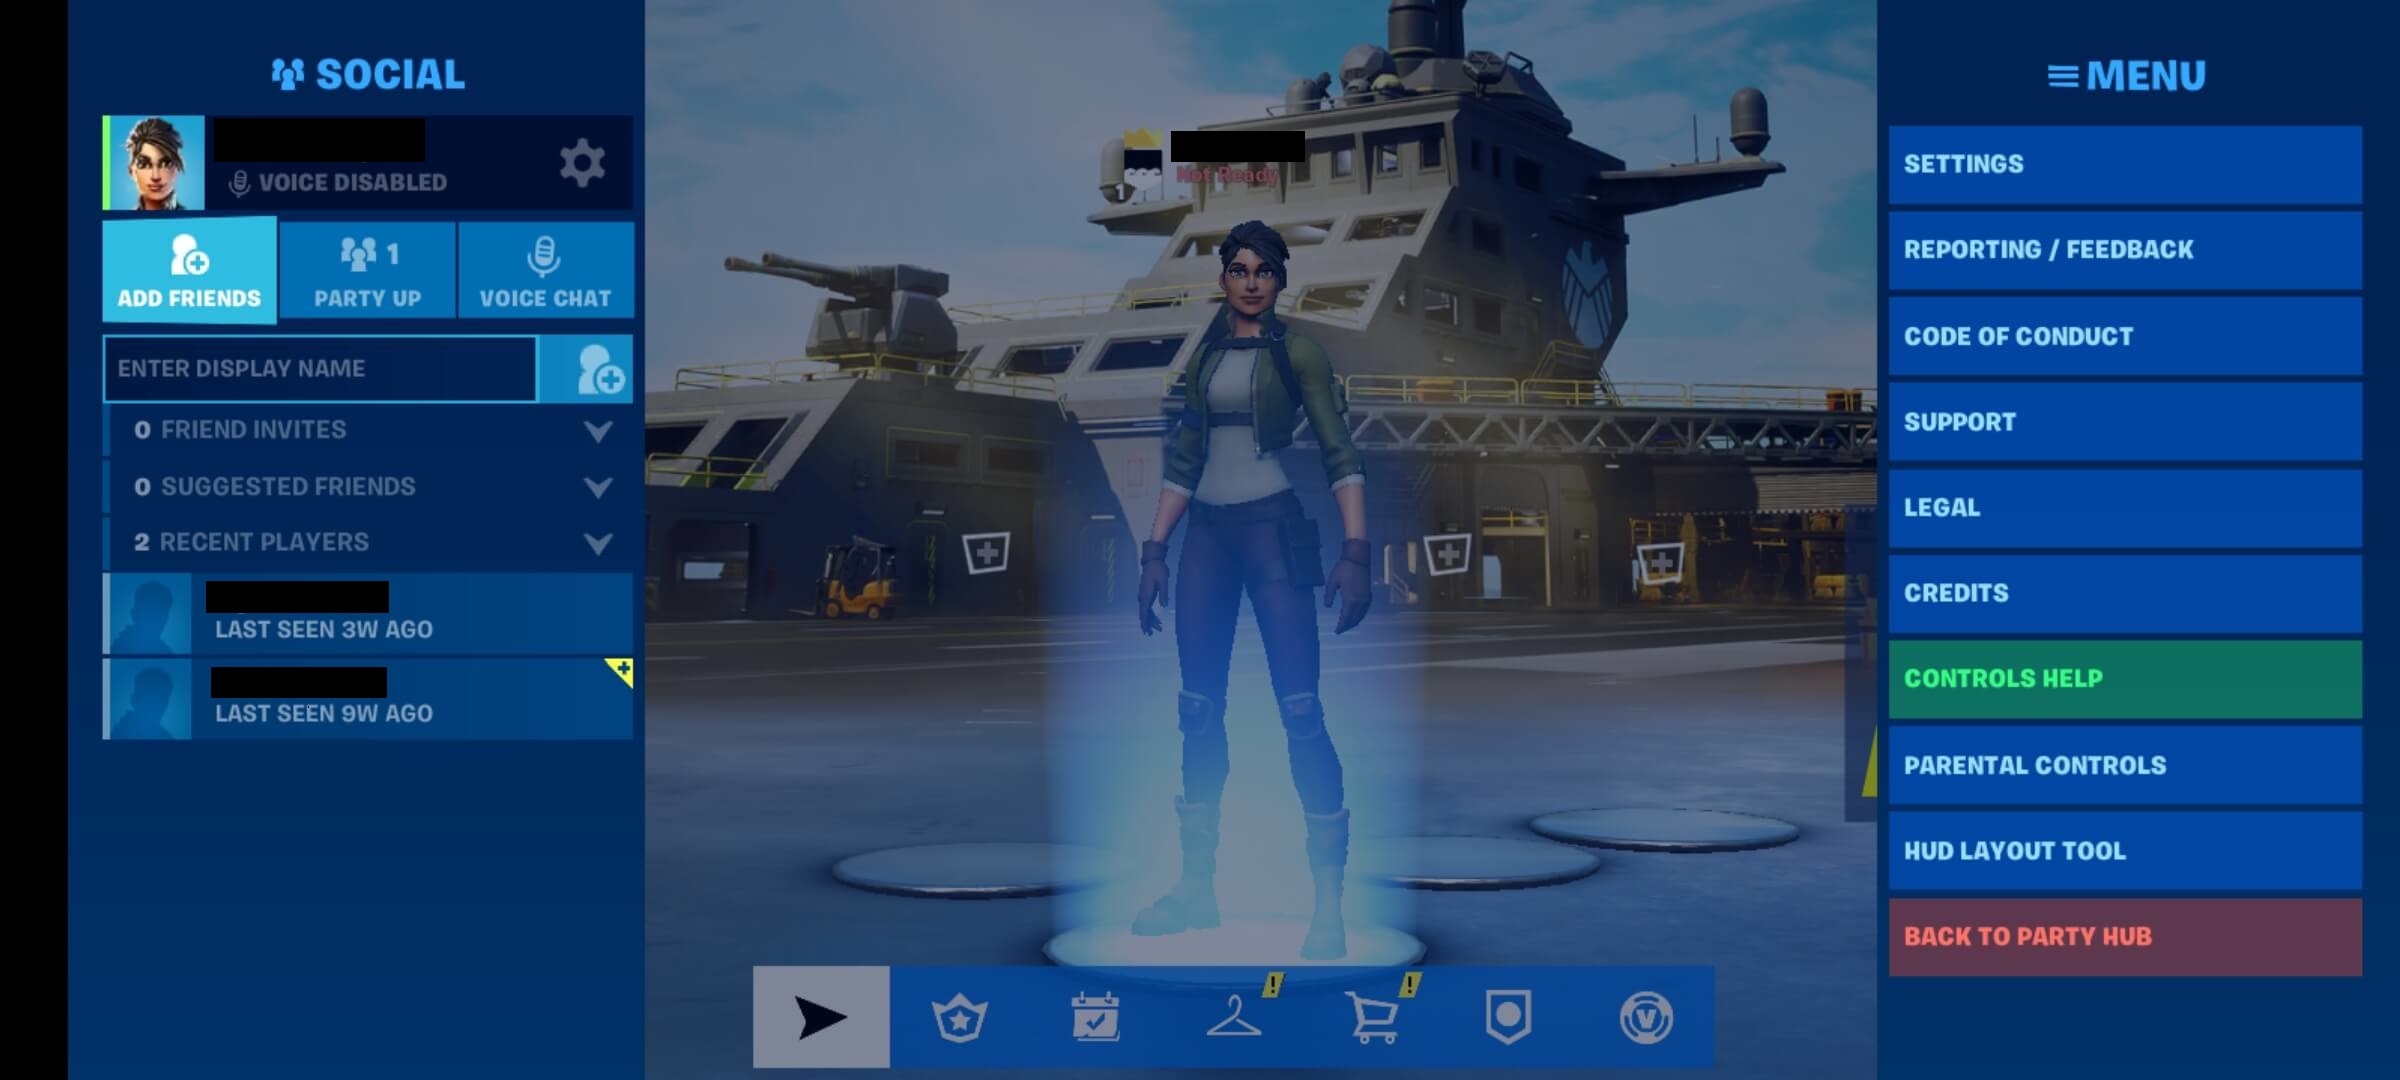 Fortnite cross platform guide: Playing across platforms - Android